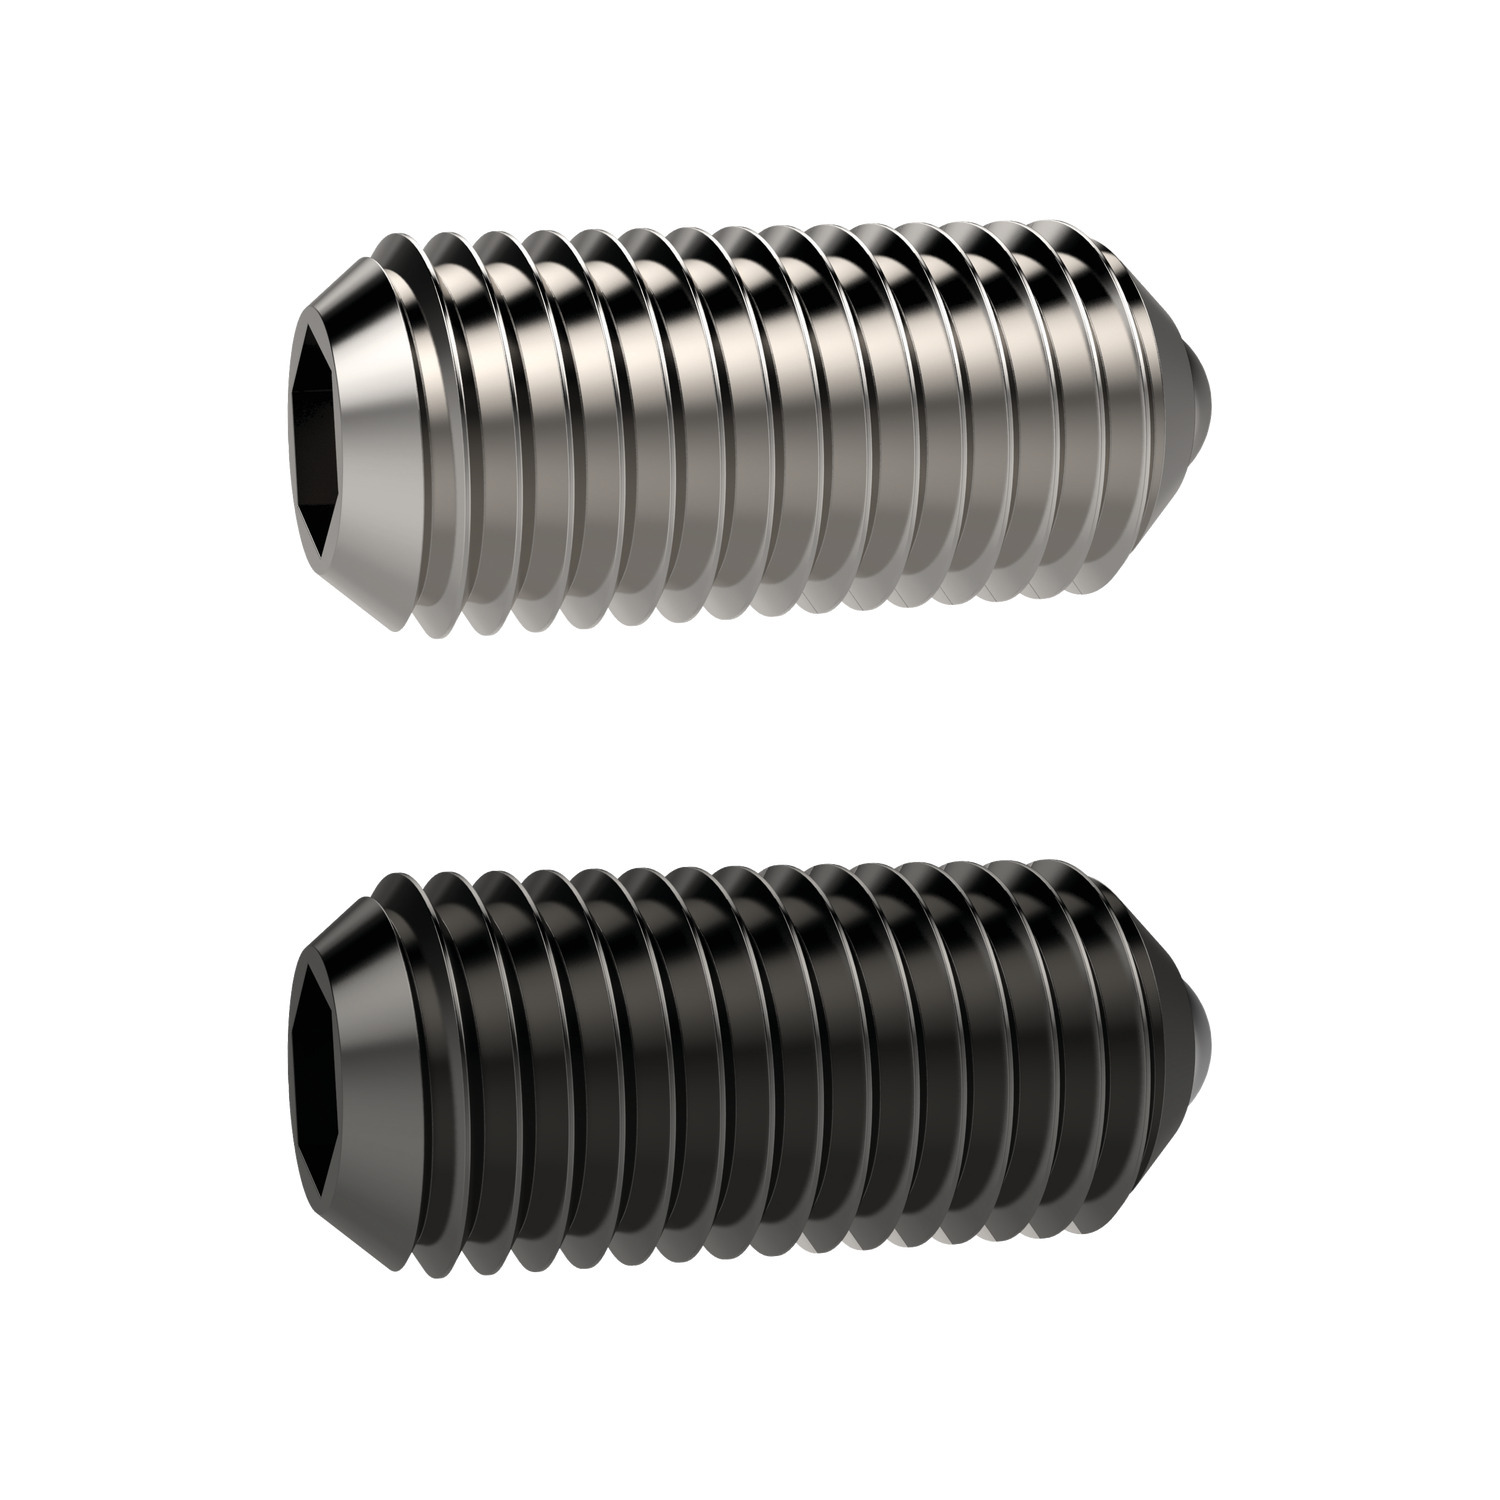 31610.W0205 Spring Plungers- Moveable Ball- S/S M5 x 14 - Stainless Steel - Standard Spring Load